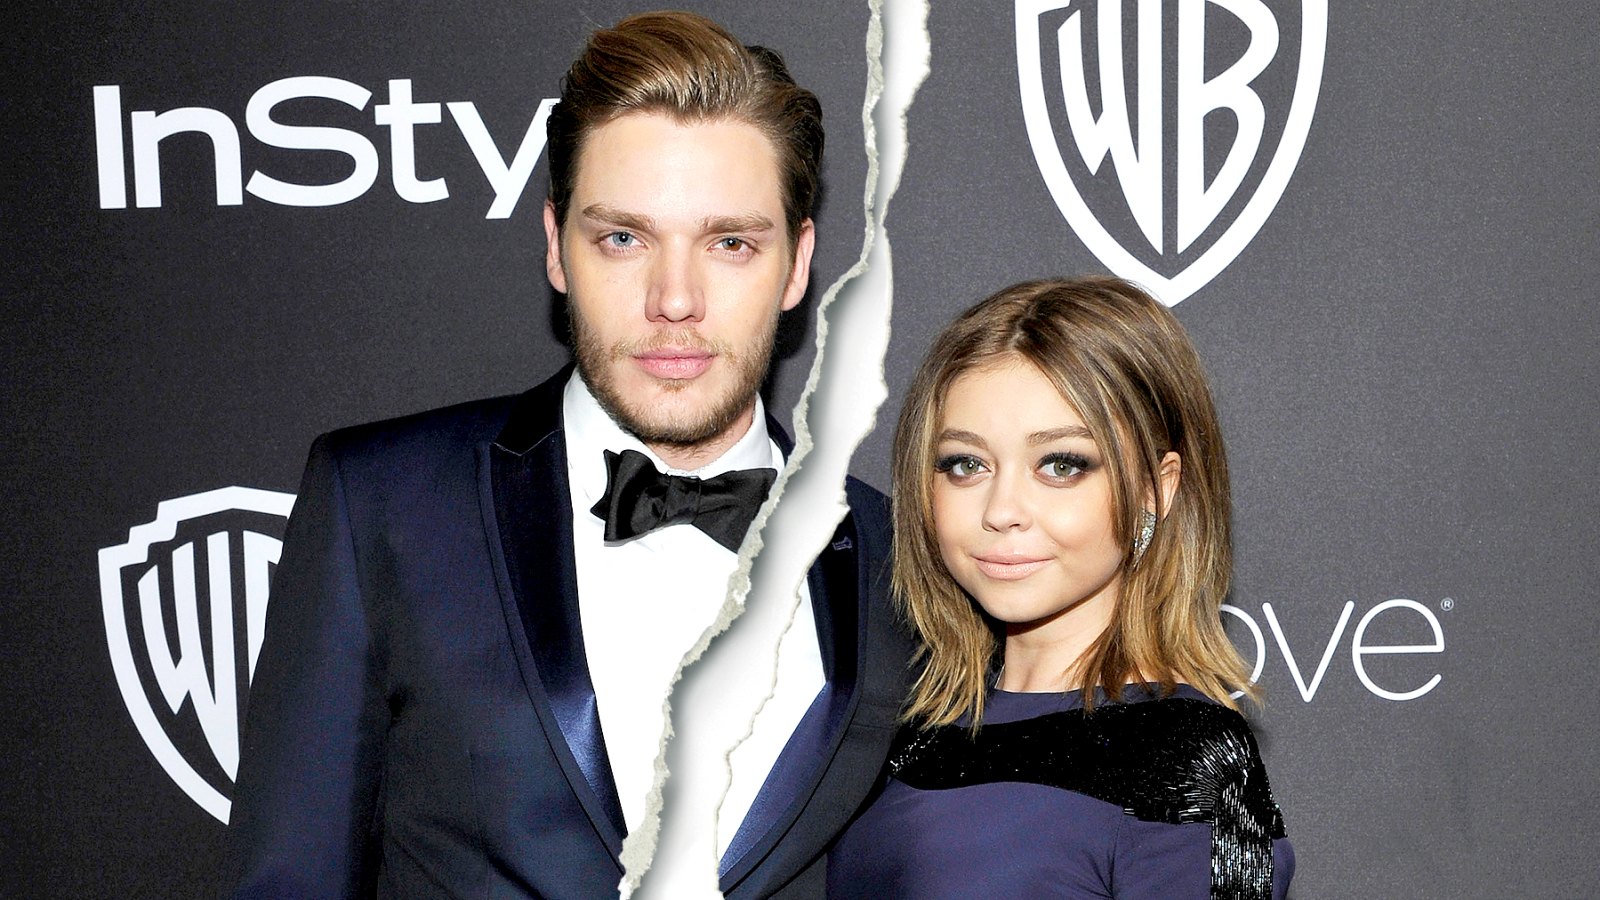 Dominic Sherwood and Sarah Hyland attend The 2017 InStyle and Warner Bros. 73rd Annual Golden Globe Awards Post-Party at The Beverly Hilton Hotel on January 8, 2017 in Beverly Hills, California.